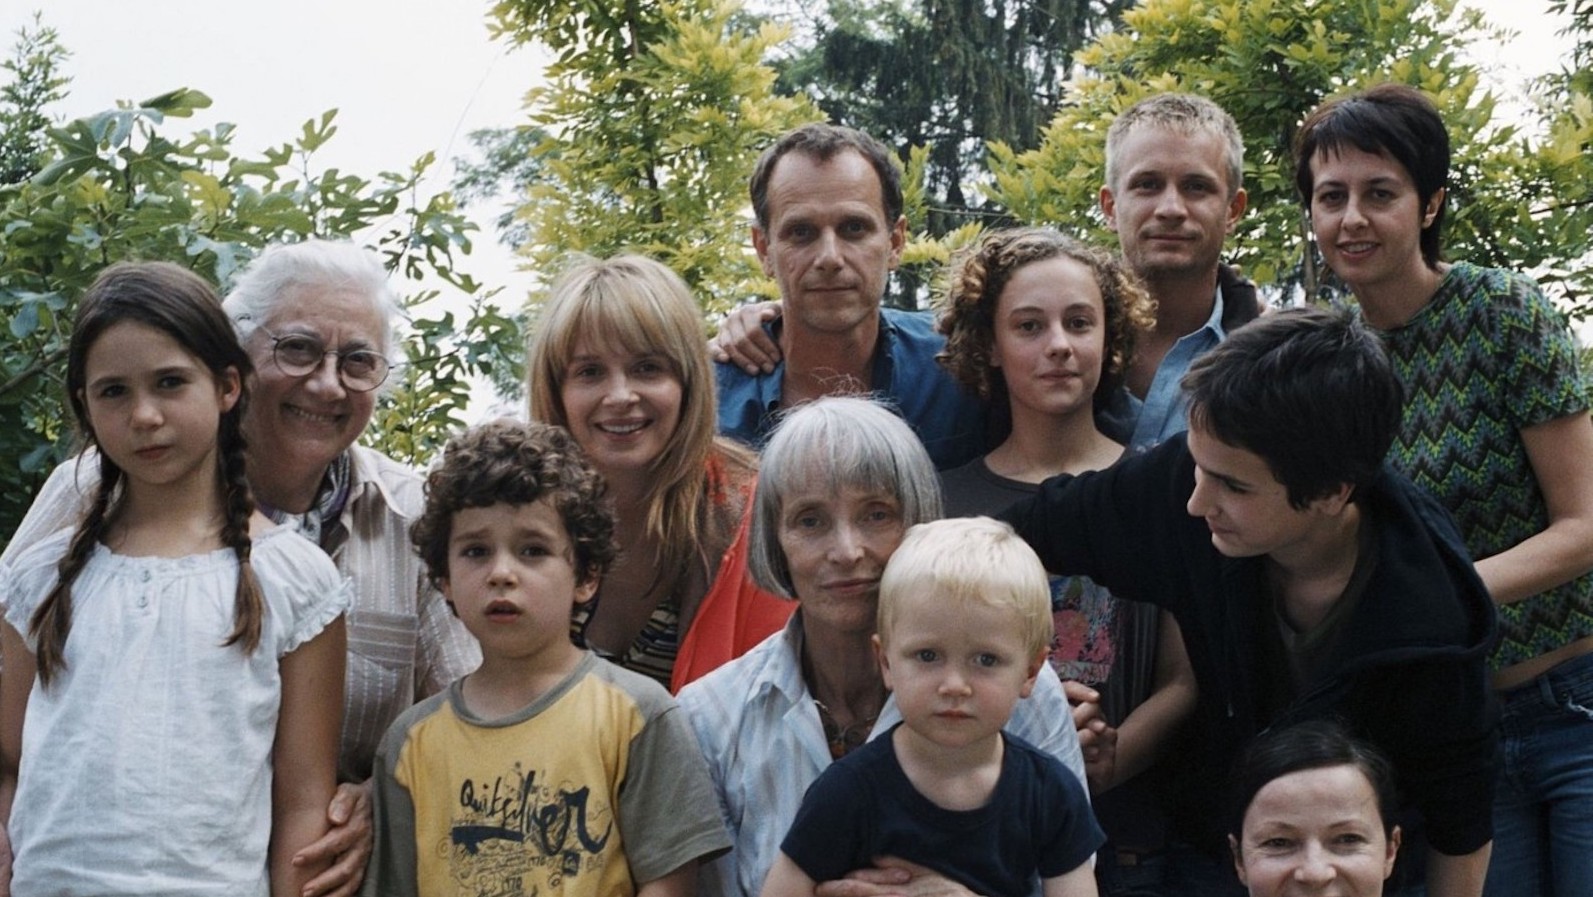 A large family looks into the camera, posing for a photo